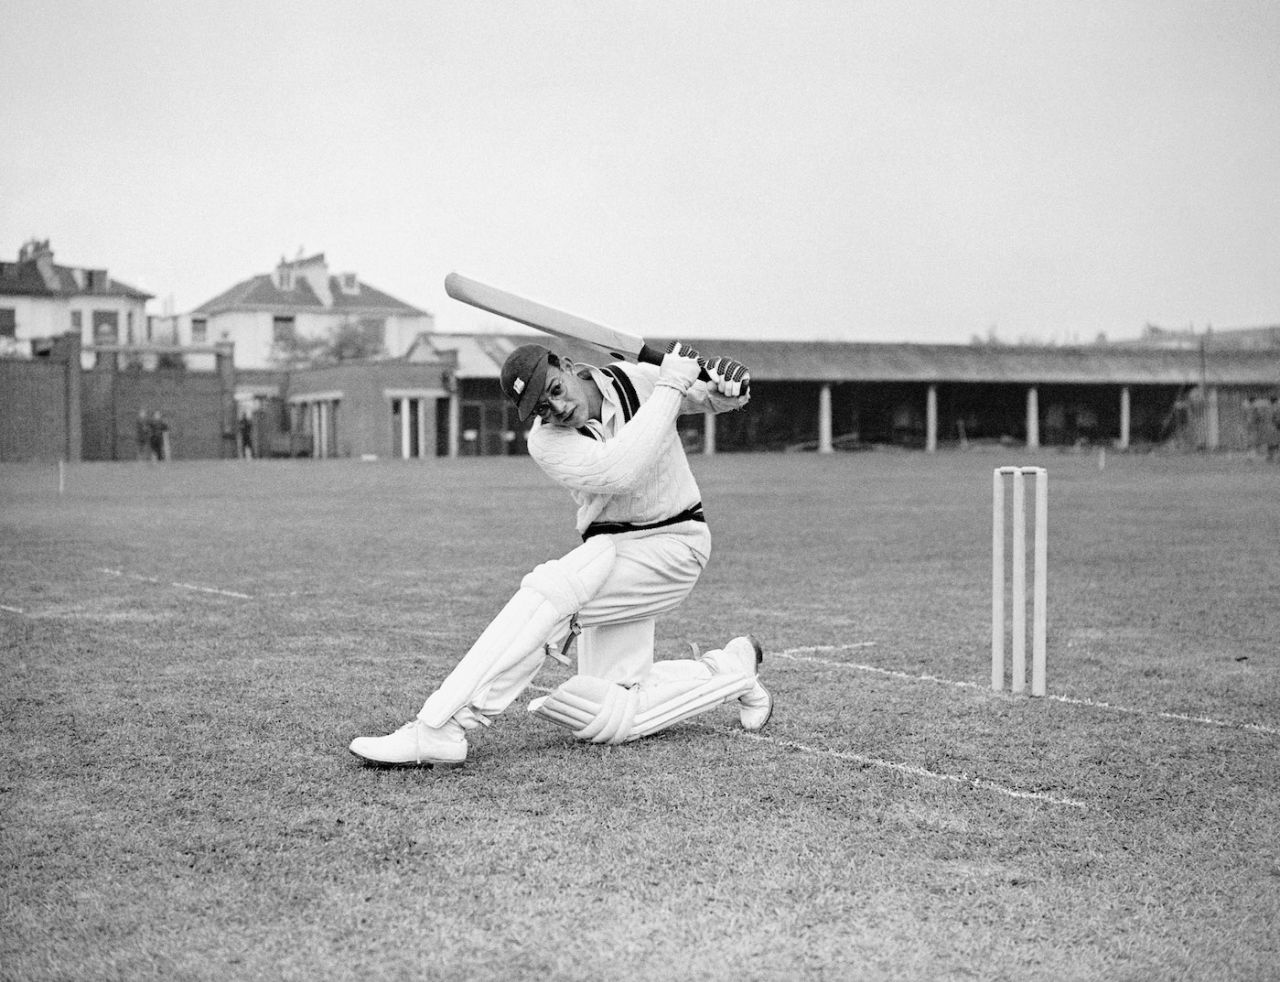 Robert Christiani practices in the nets, Lord's, London, April 14, 1950